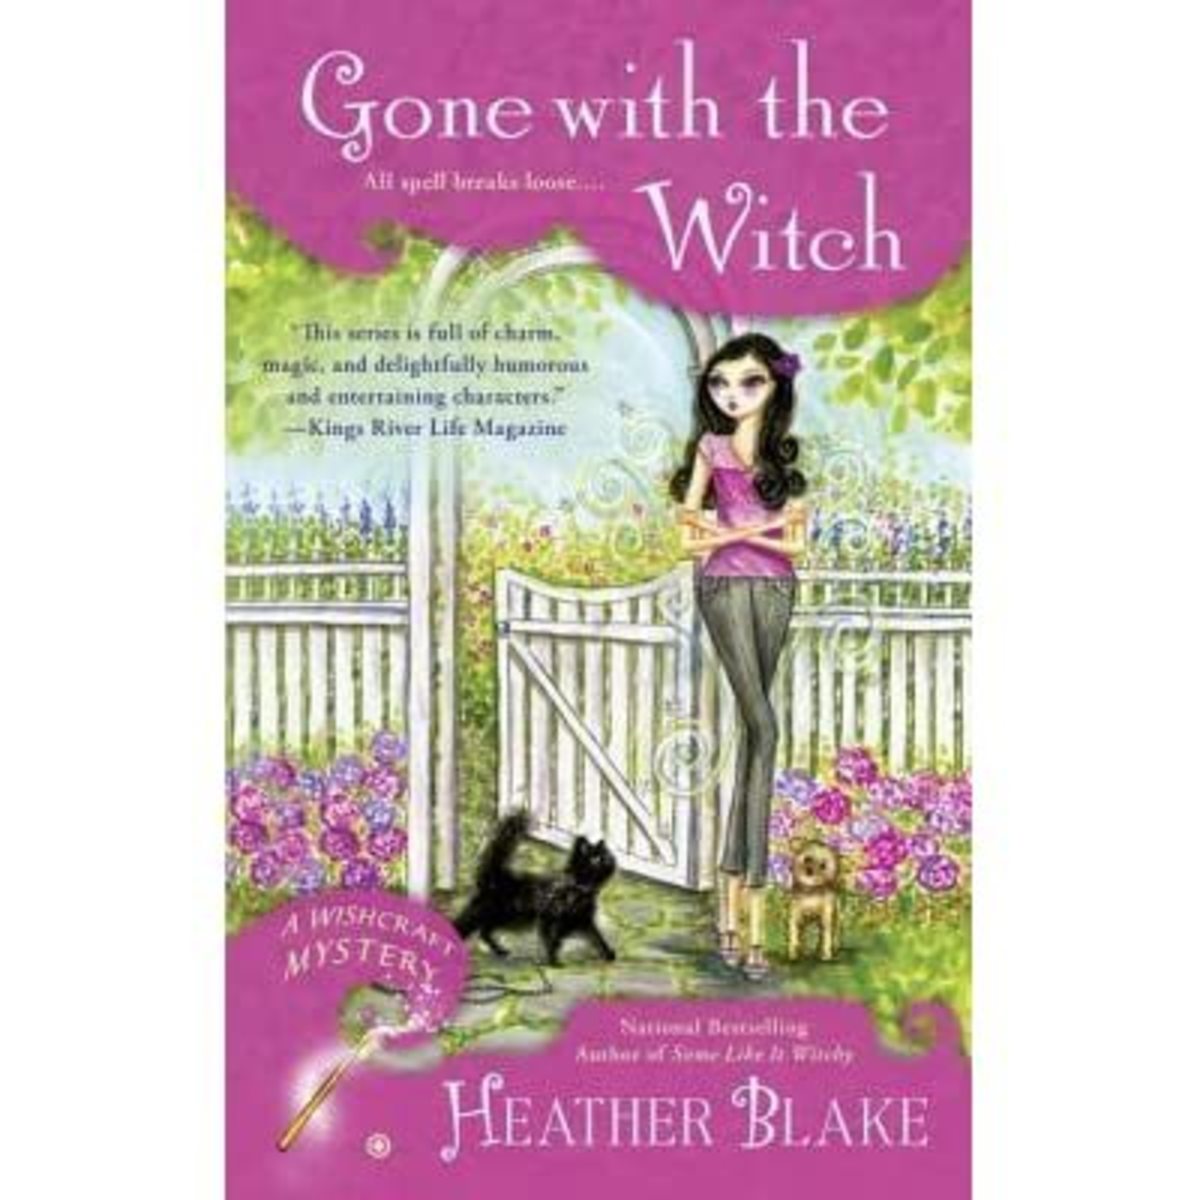 Book Review: Gone with the Witch by Heather Blake